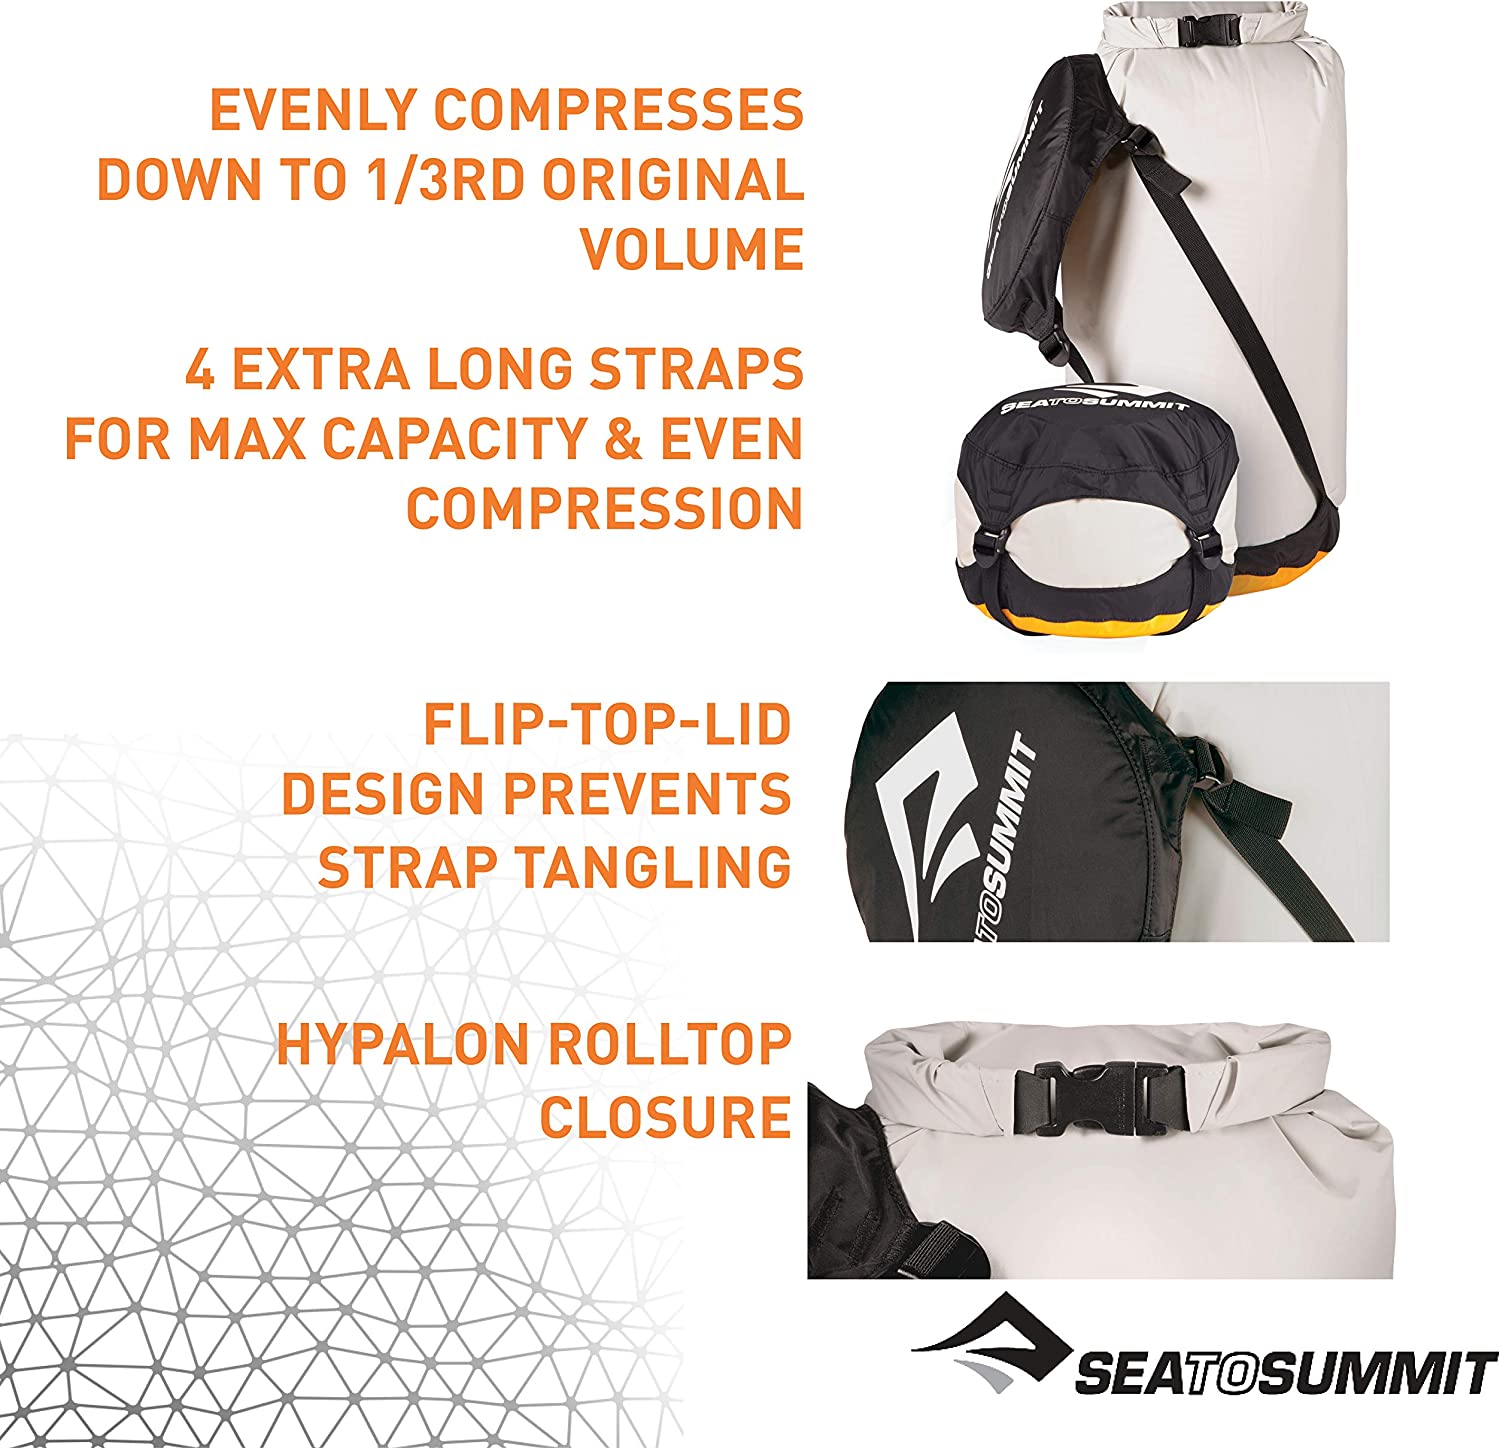 Sea to Summit eVent Compression Dry Sack - image 4 of 7